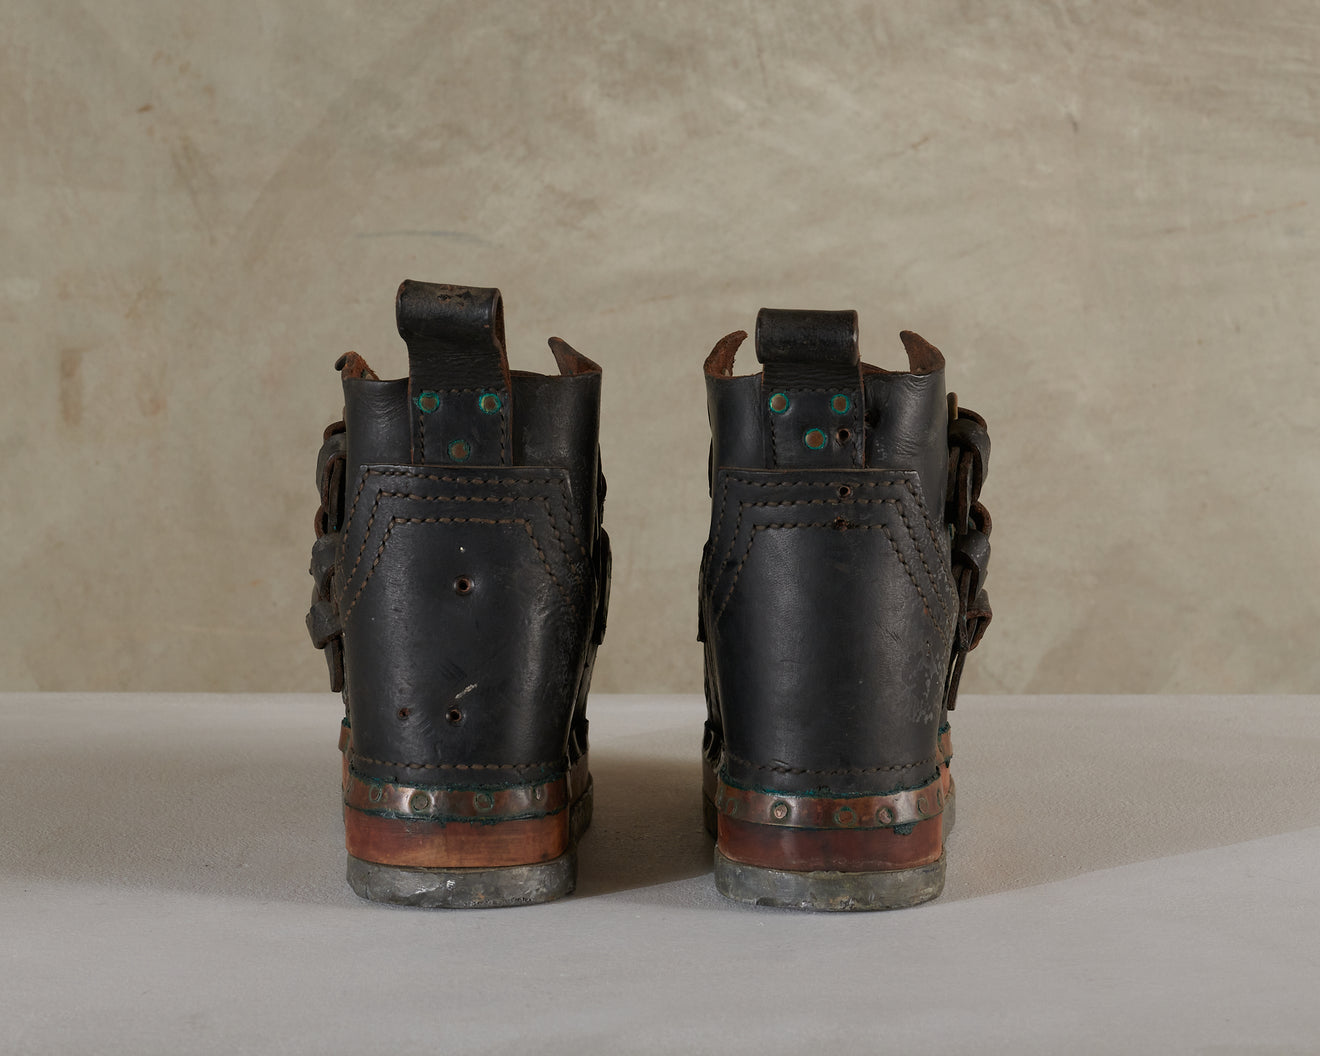 PAIR OF RUSSIAN DEEP SEA DIVING BOOTS